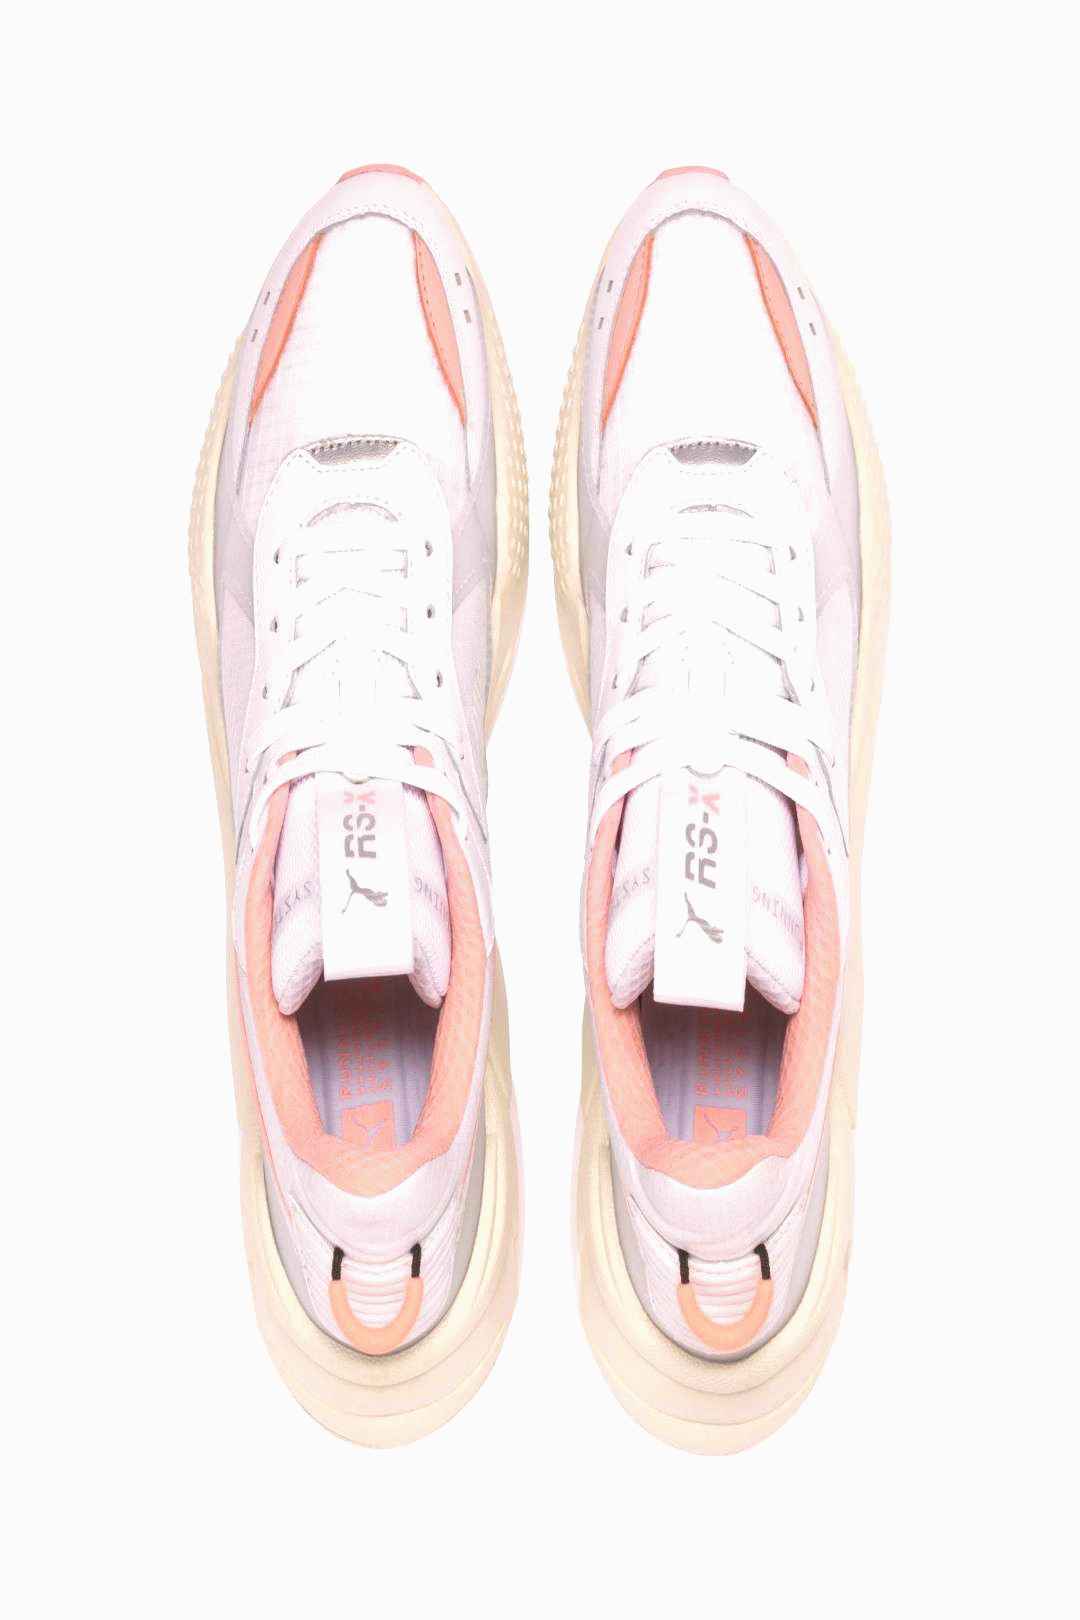 puma basketball shoes pink online store up to 67 off gif small